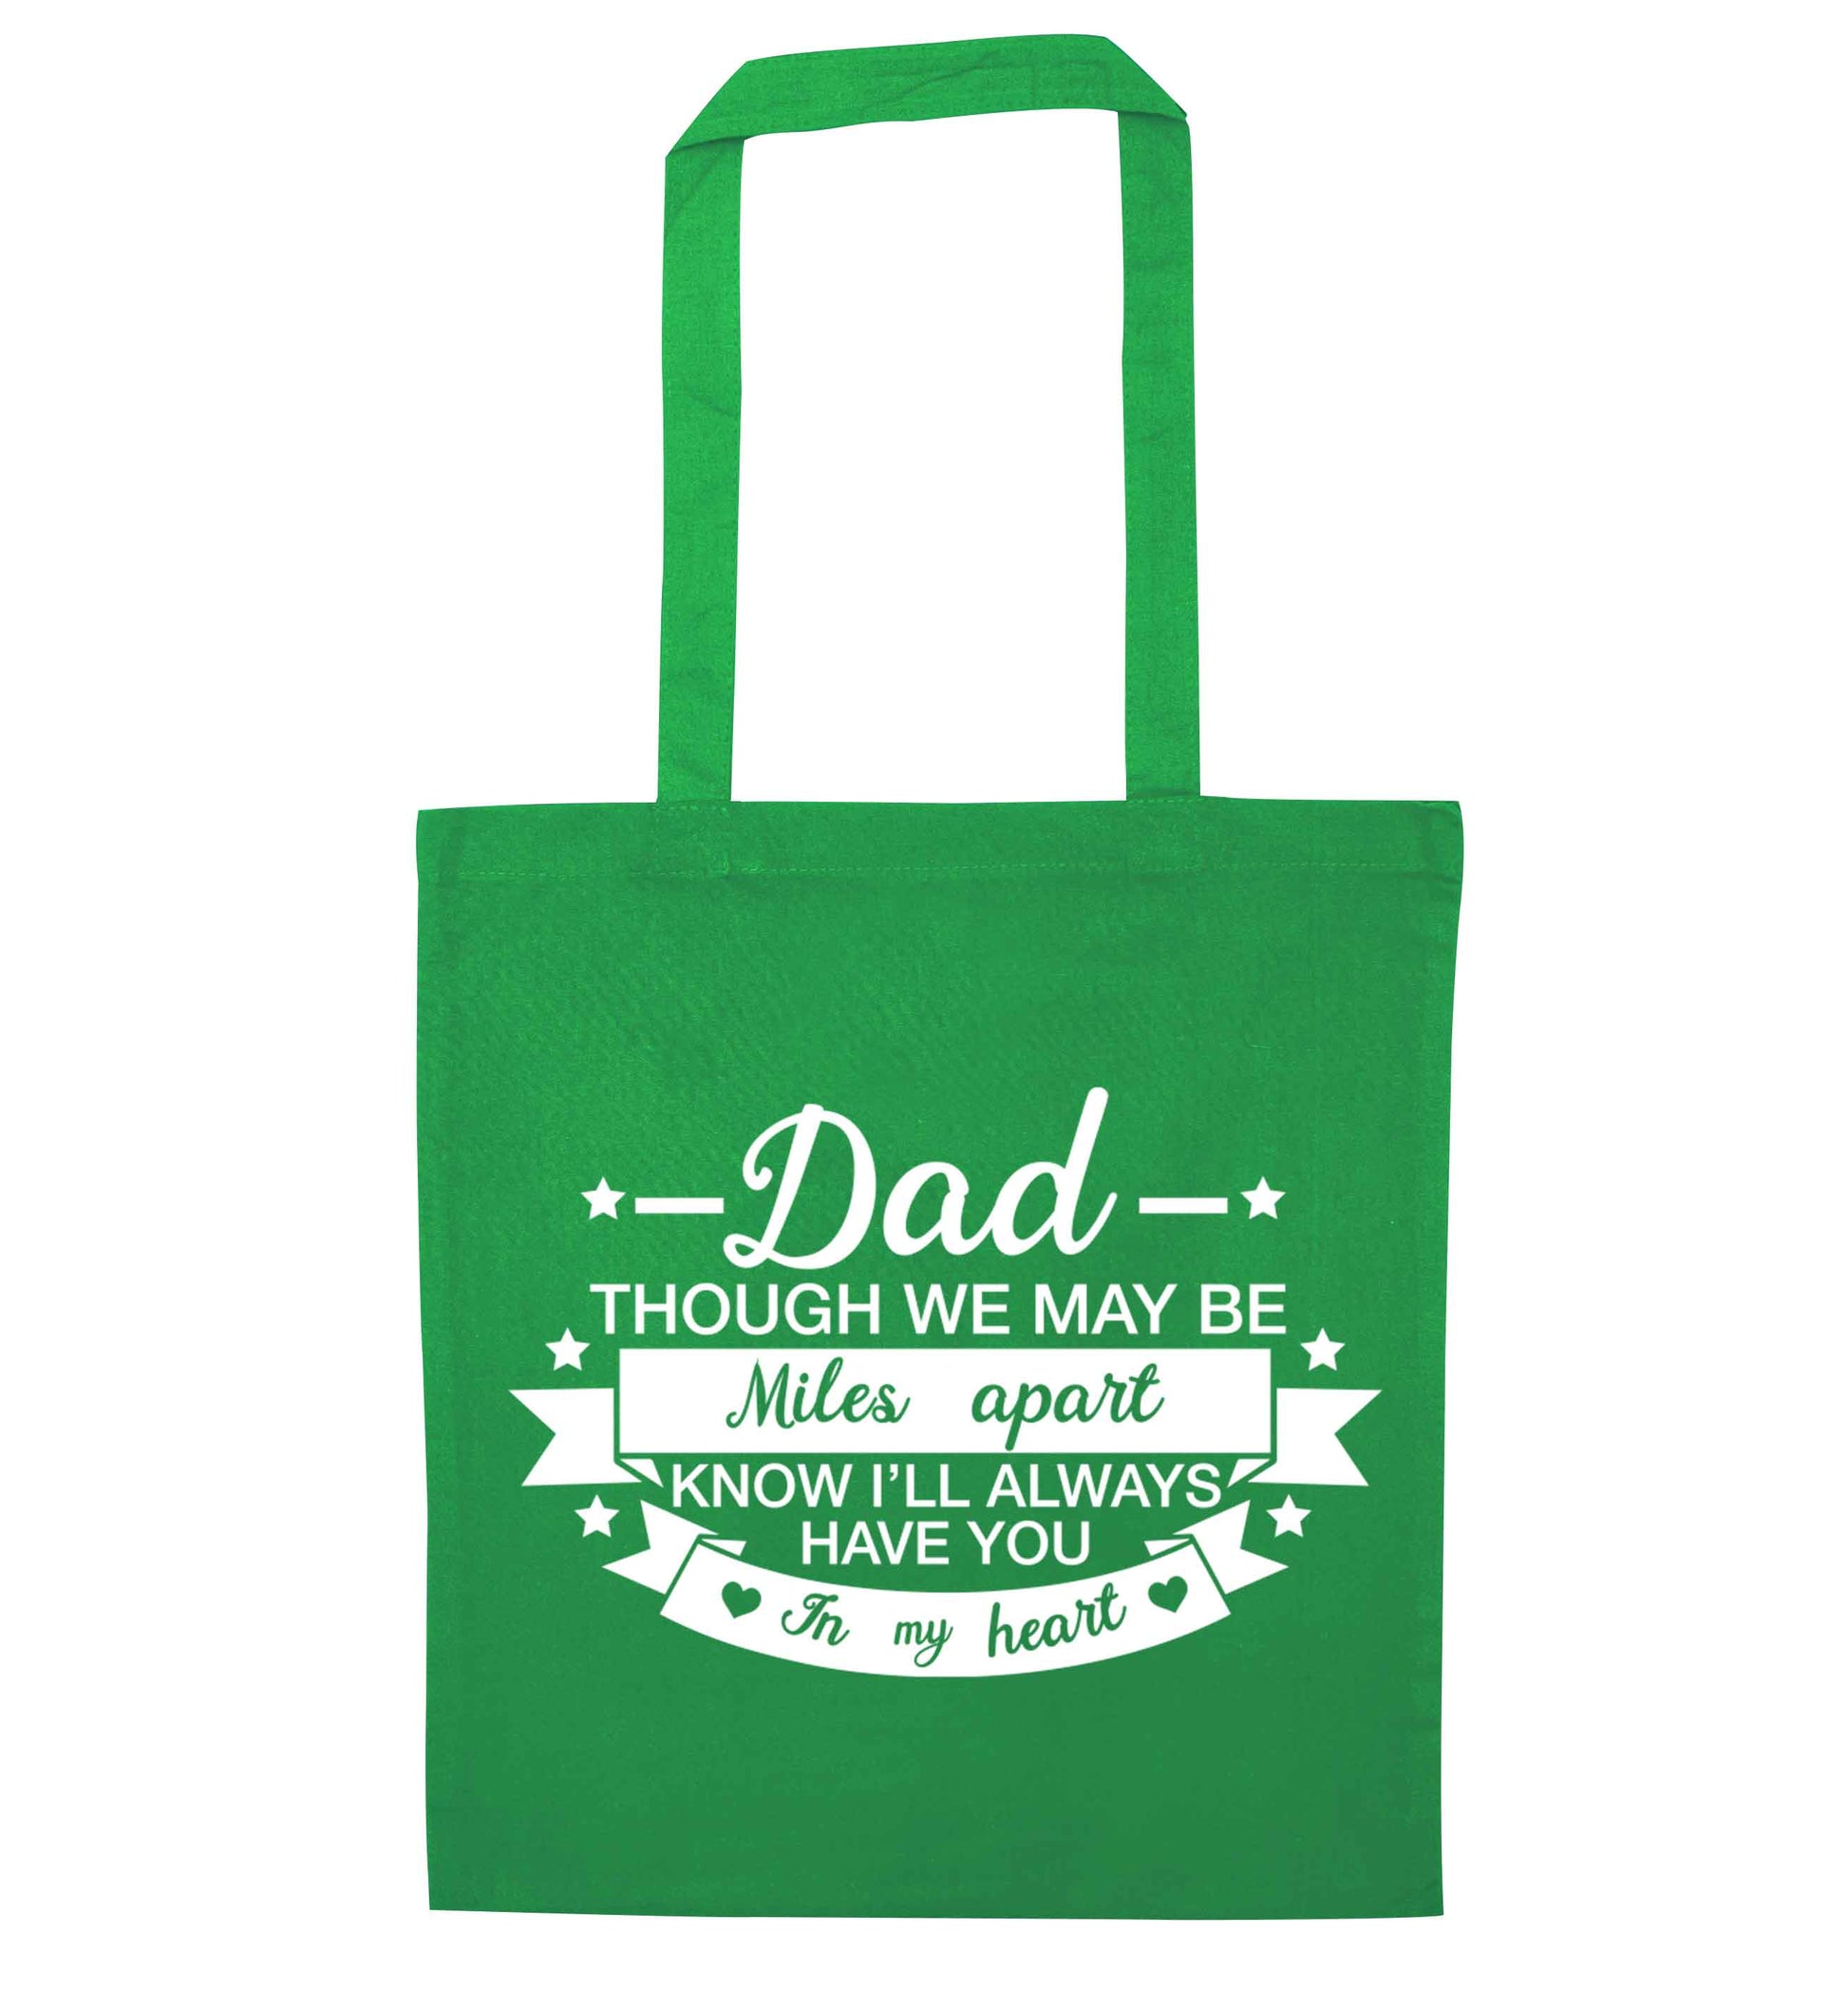 Dad though we are miles apart know I'll always have you in my heart green tote bag